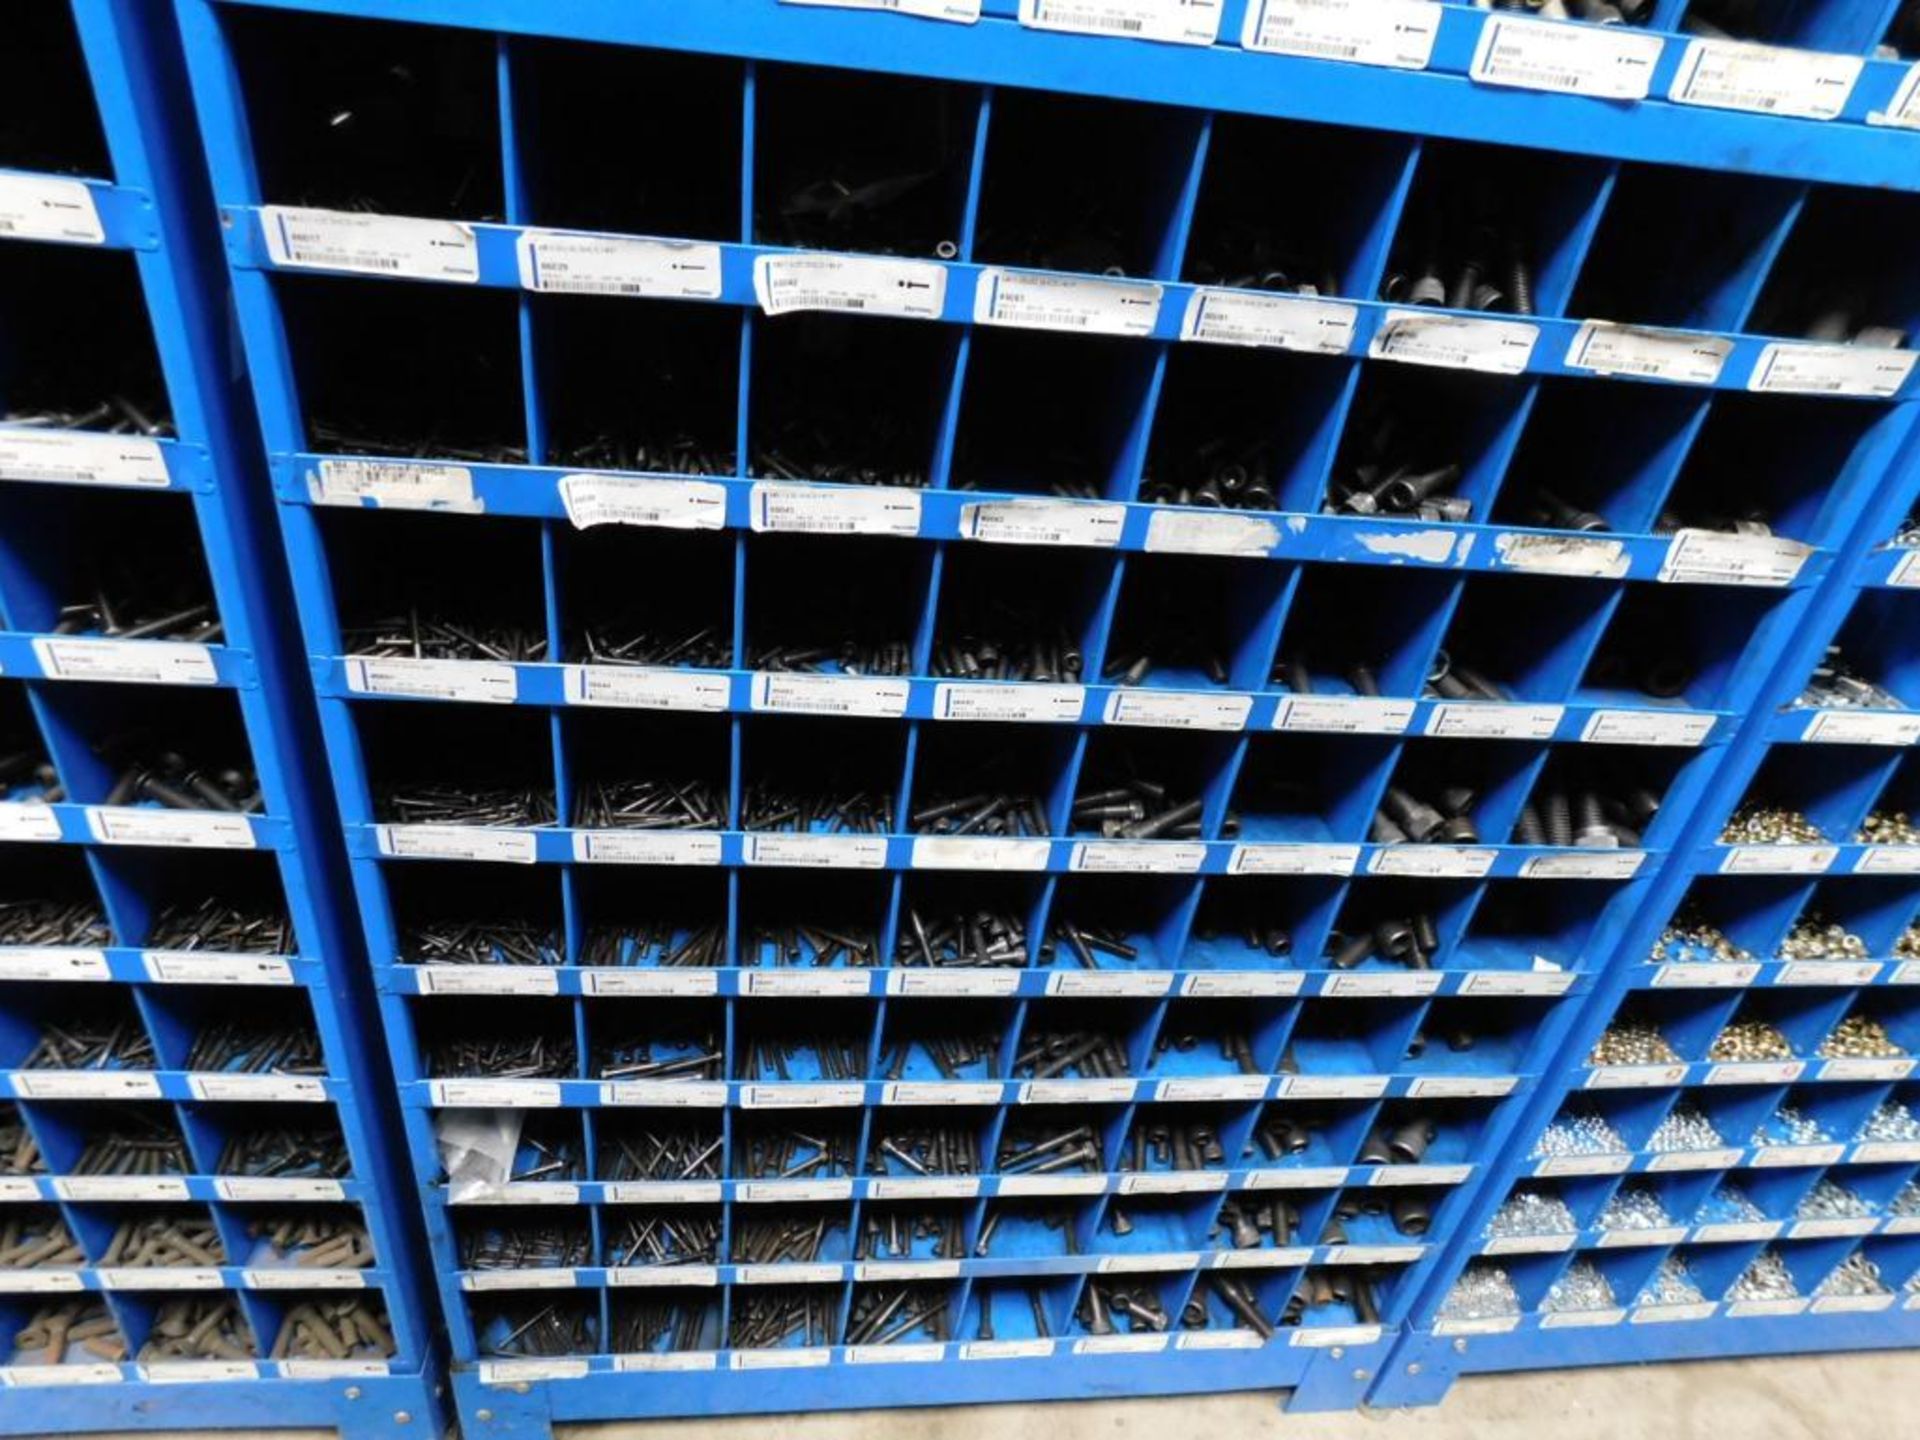 LOT: (5) Sections Fastenal Compartment Organizers w/Contents of Assorted Hardware, Bolts, Nuts, Wash - Image 5 of 11